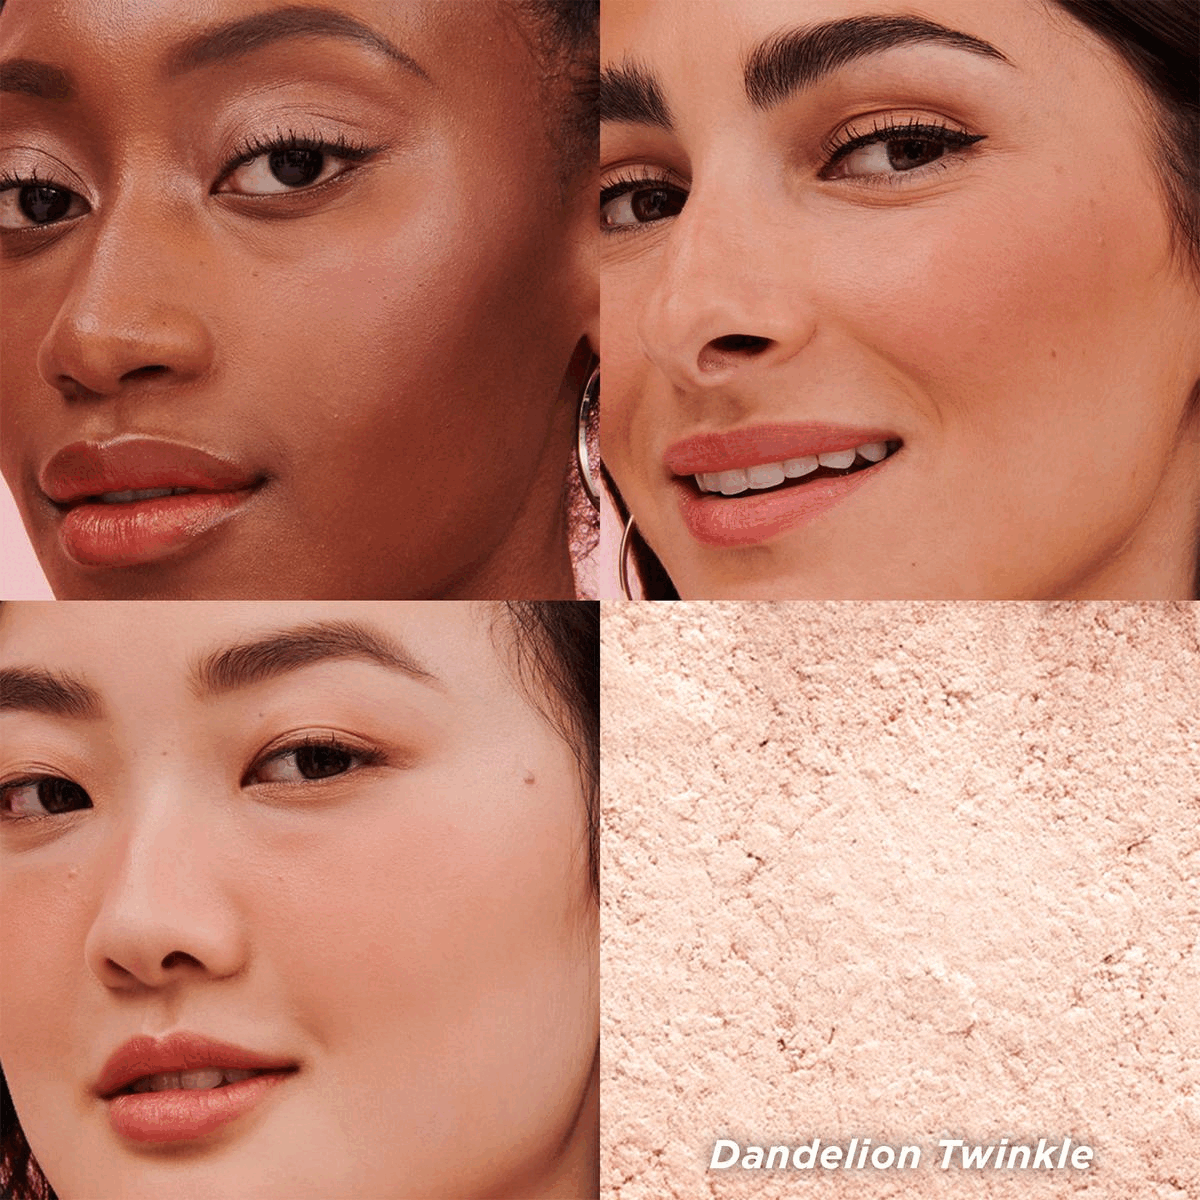 Two images transitioning into each other in an endless loop. Image 1: Showing the product modelled on three different skin tones. text - dandellion twinkle. Image 2: Shows the smaller and larger version of the product. Text - Mini. Full Size.